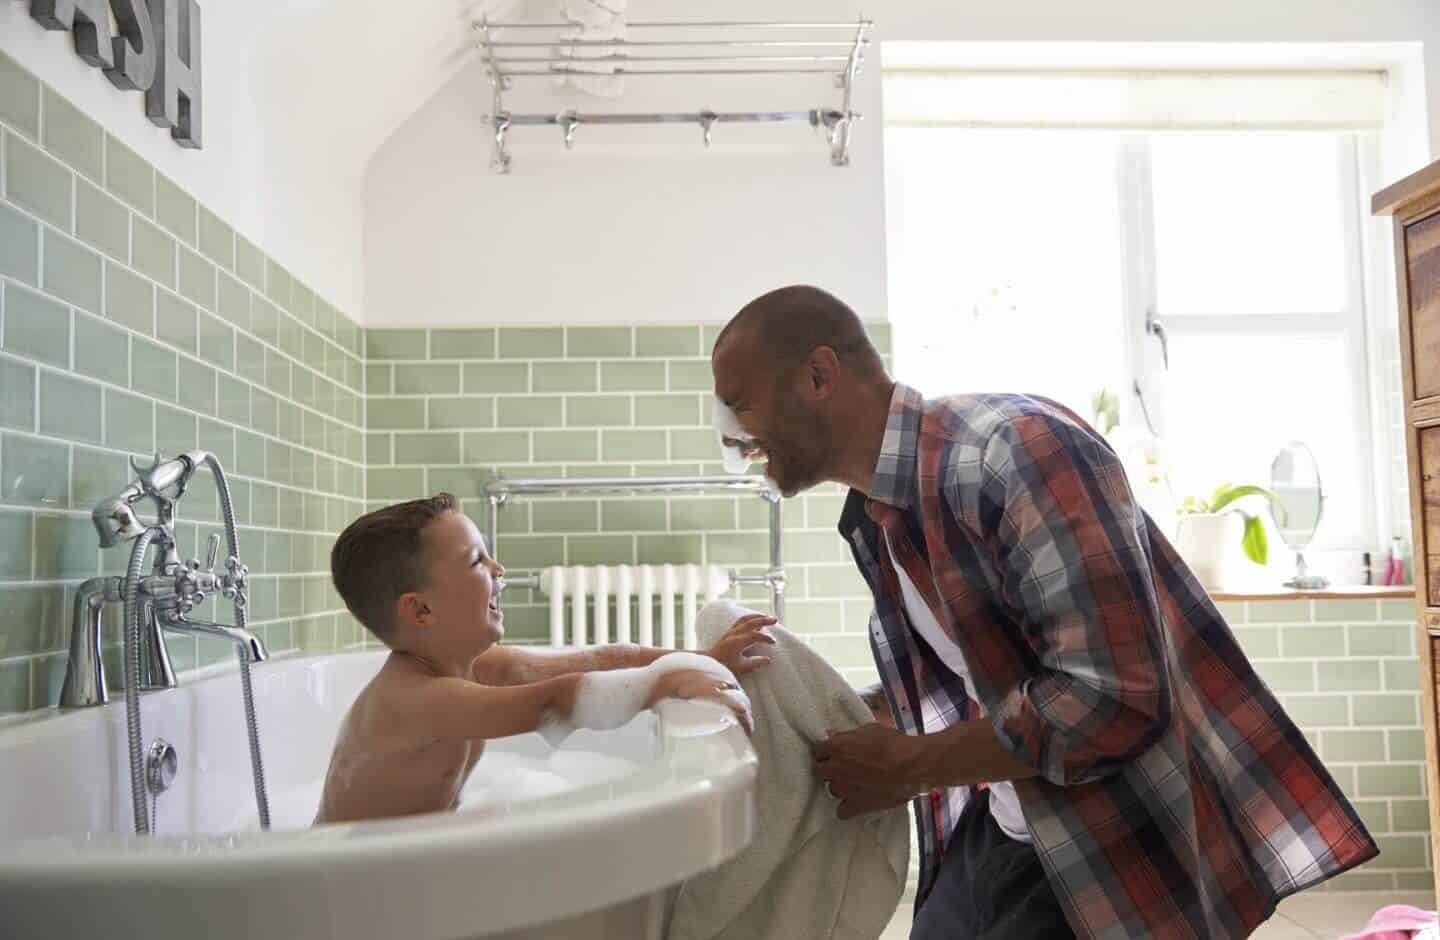 Dad giving healthier bath to son with home water softener system